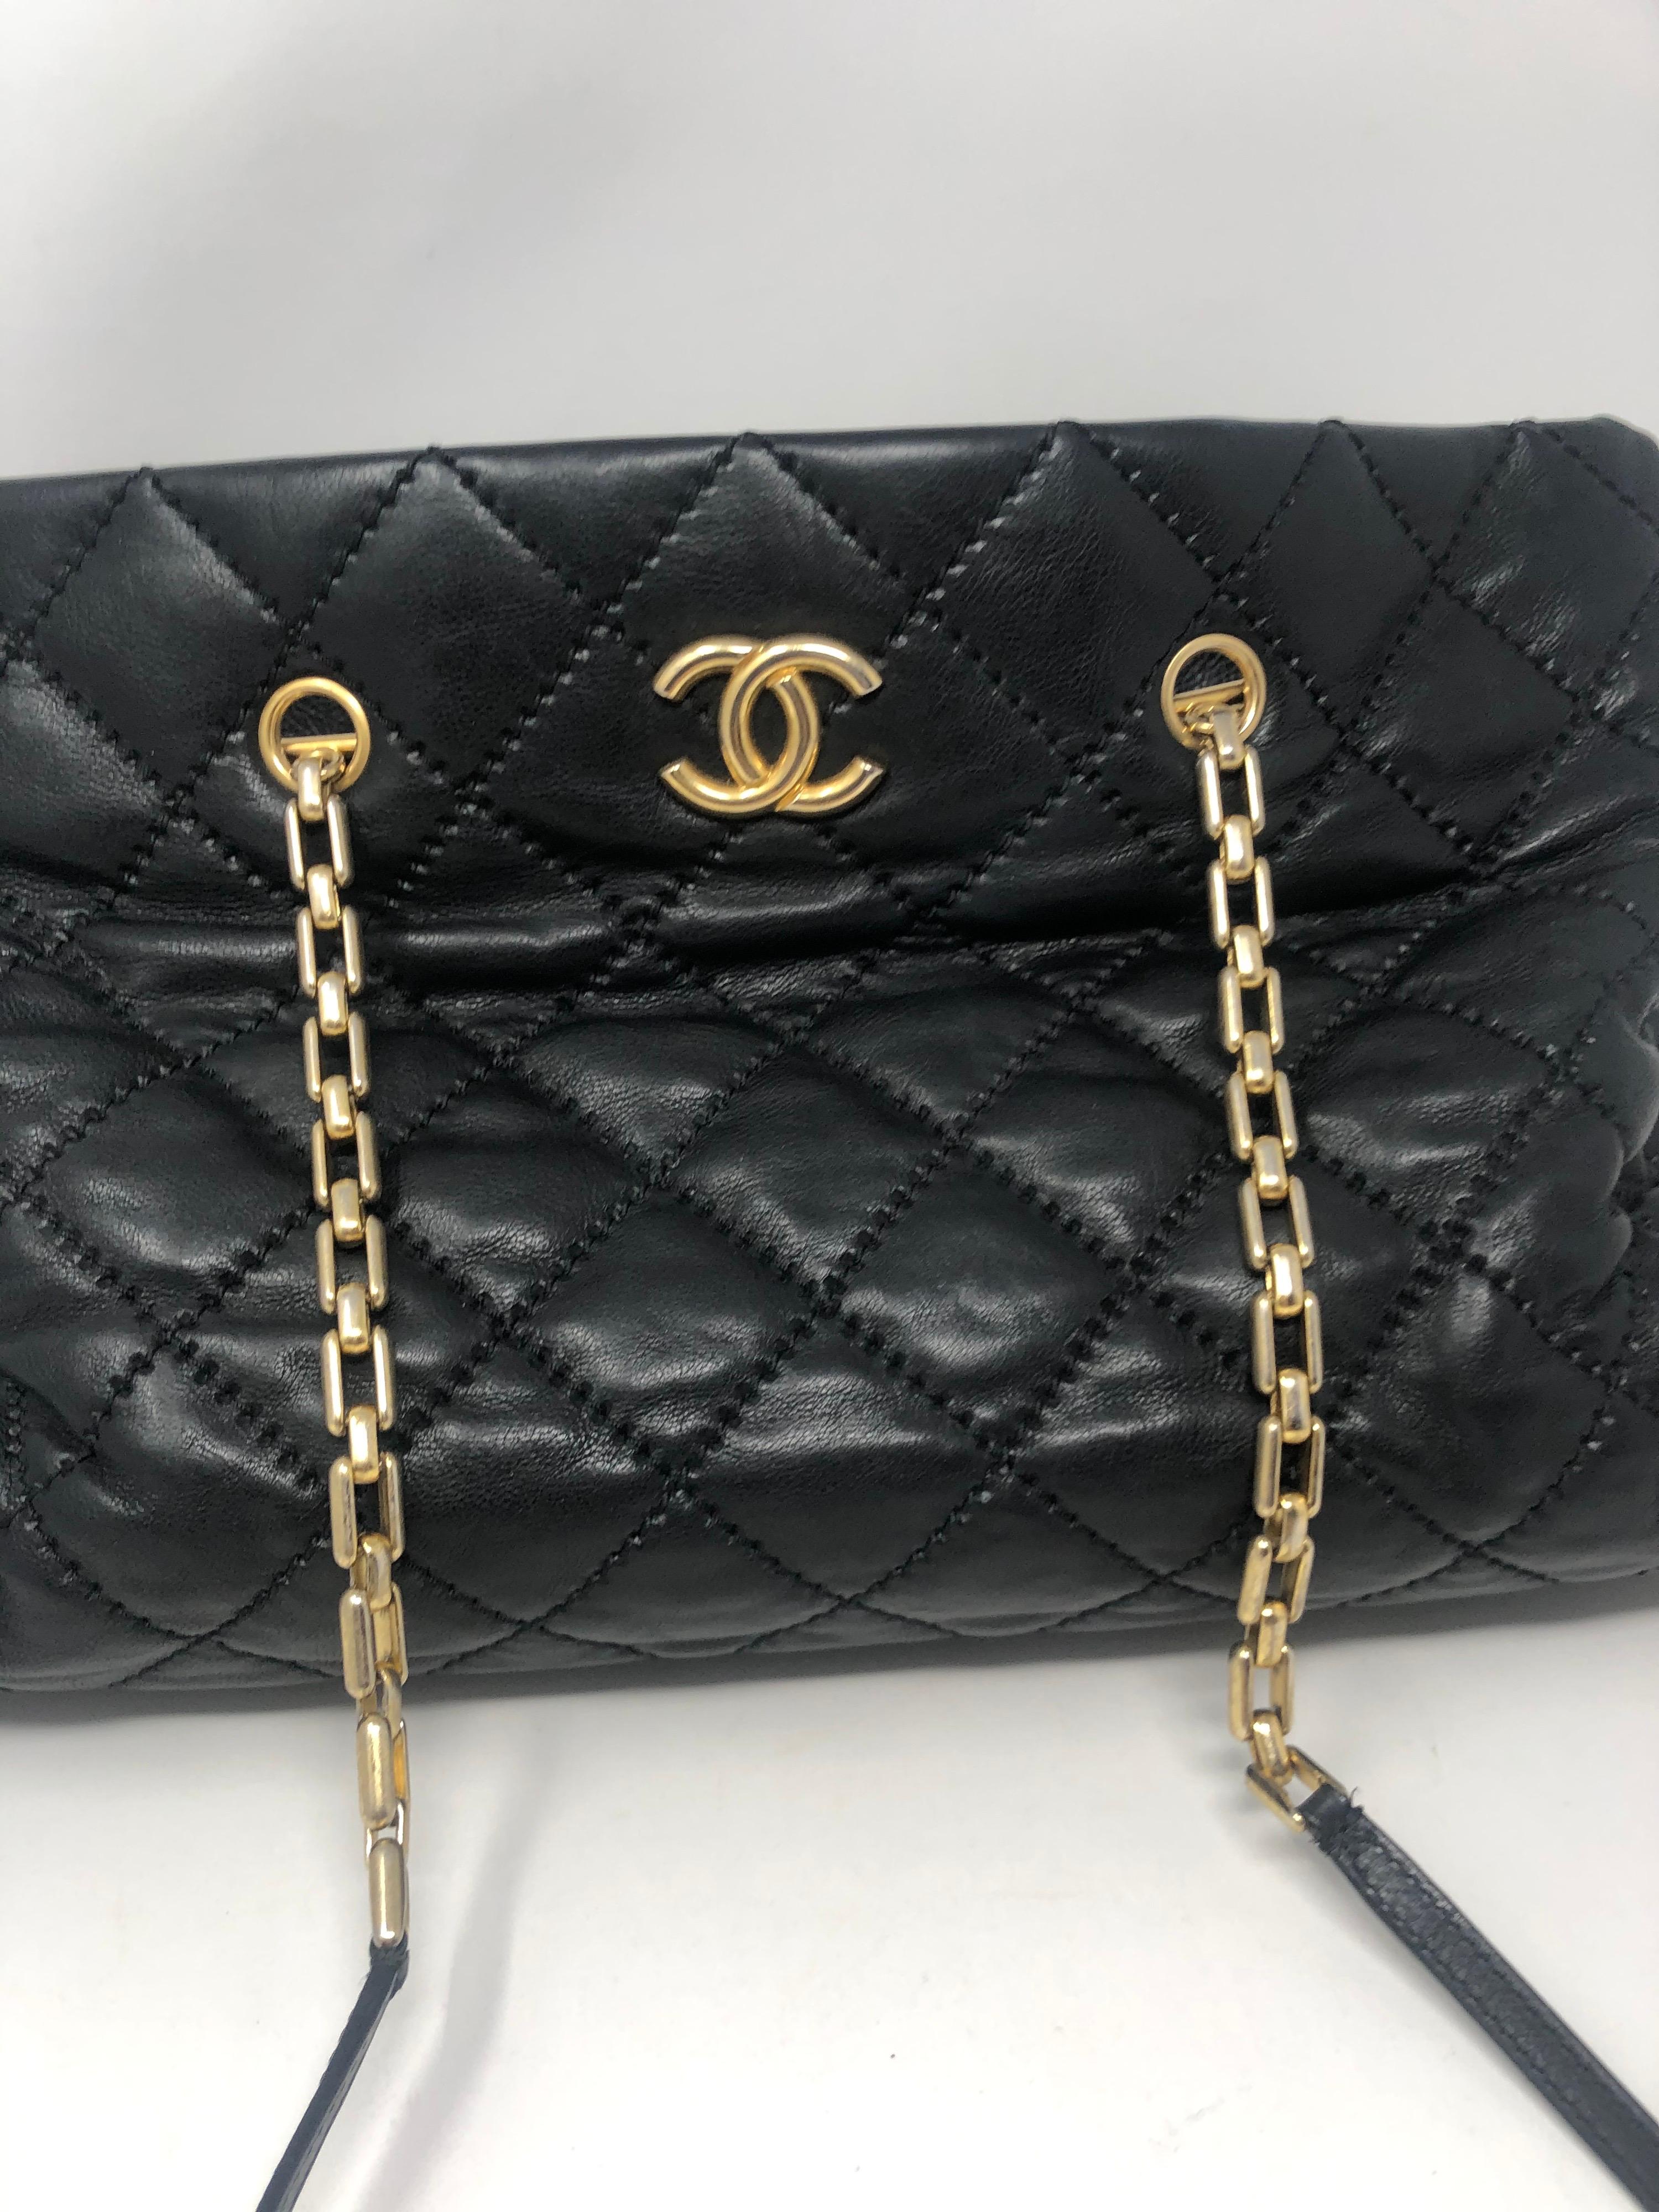 Chanel Black Leather Tote. Good condition. Leather has a natural distressed look. Interior clean. Guaranteed authentic. 